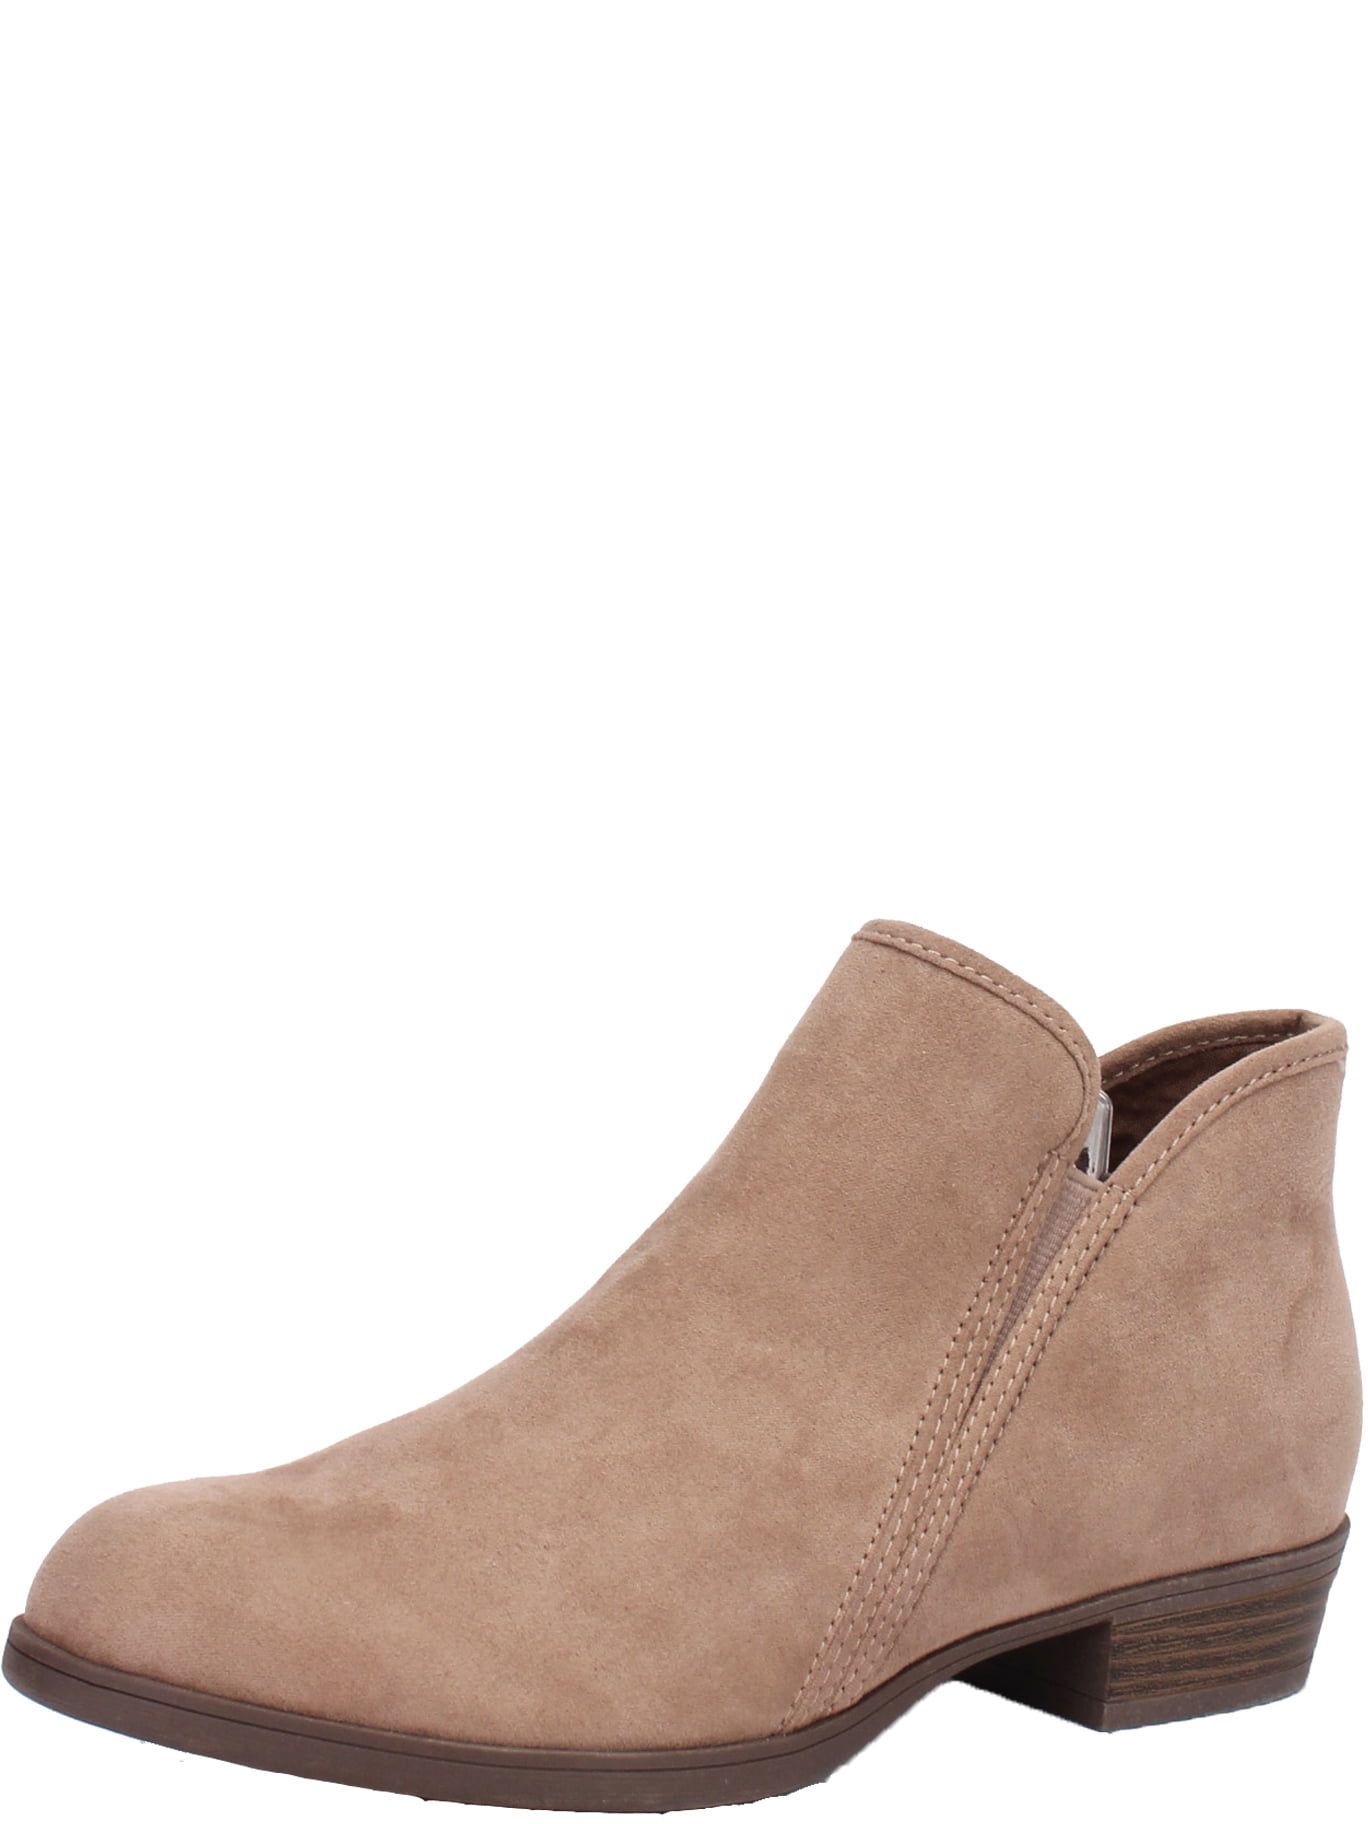 Women's Time and Tru Bootie 